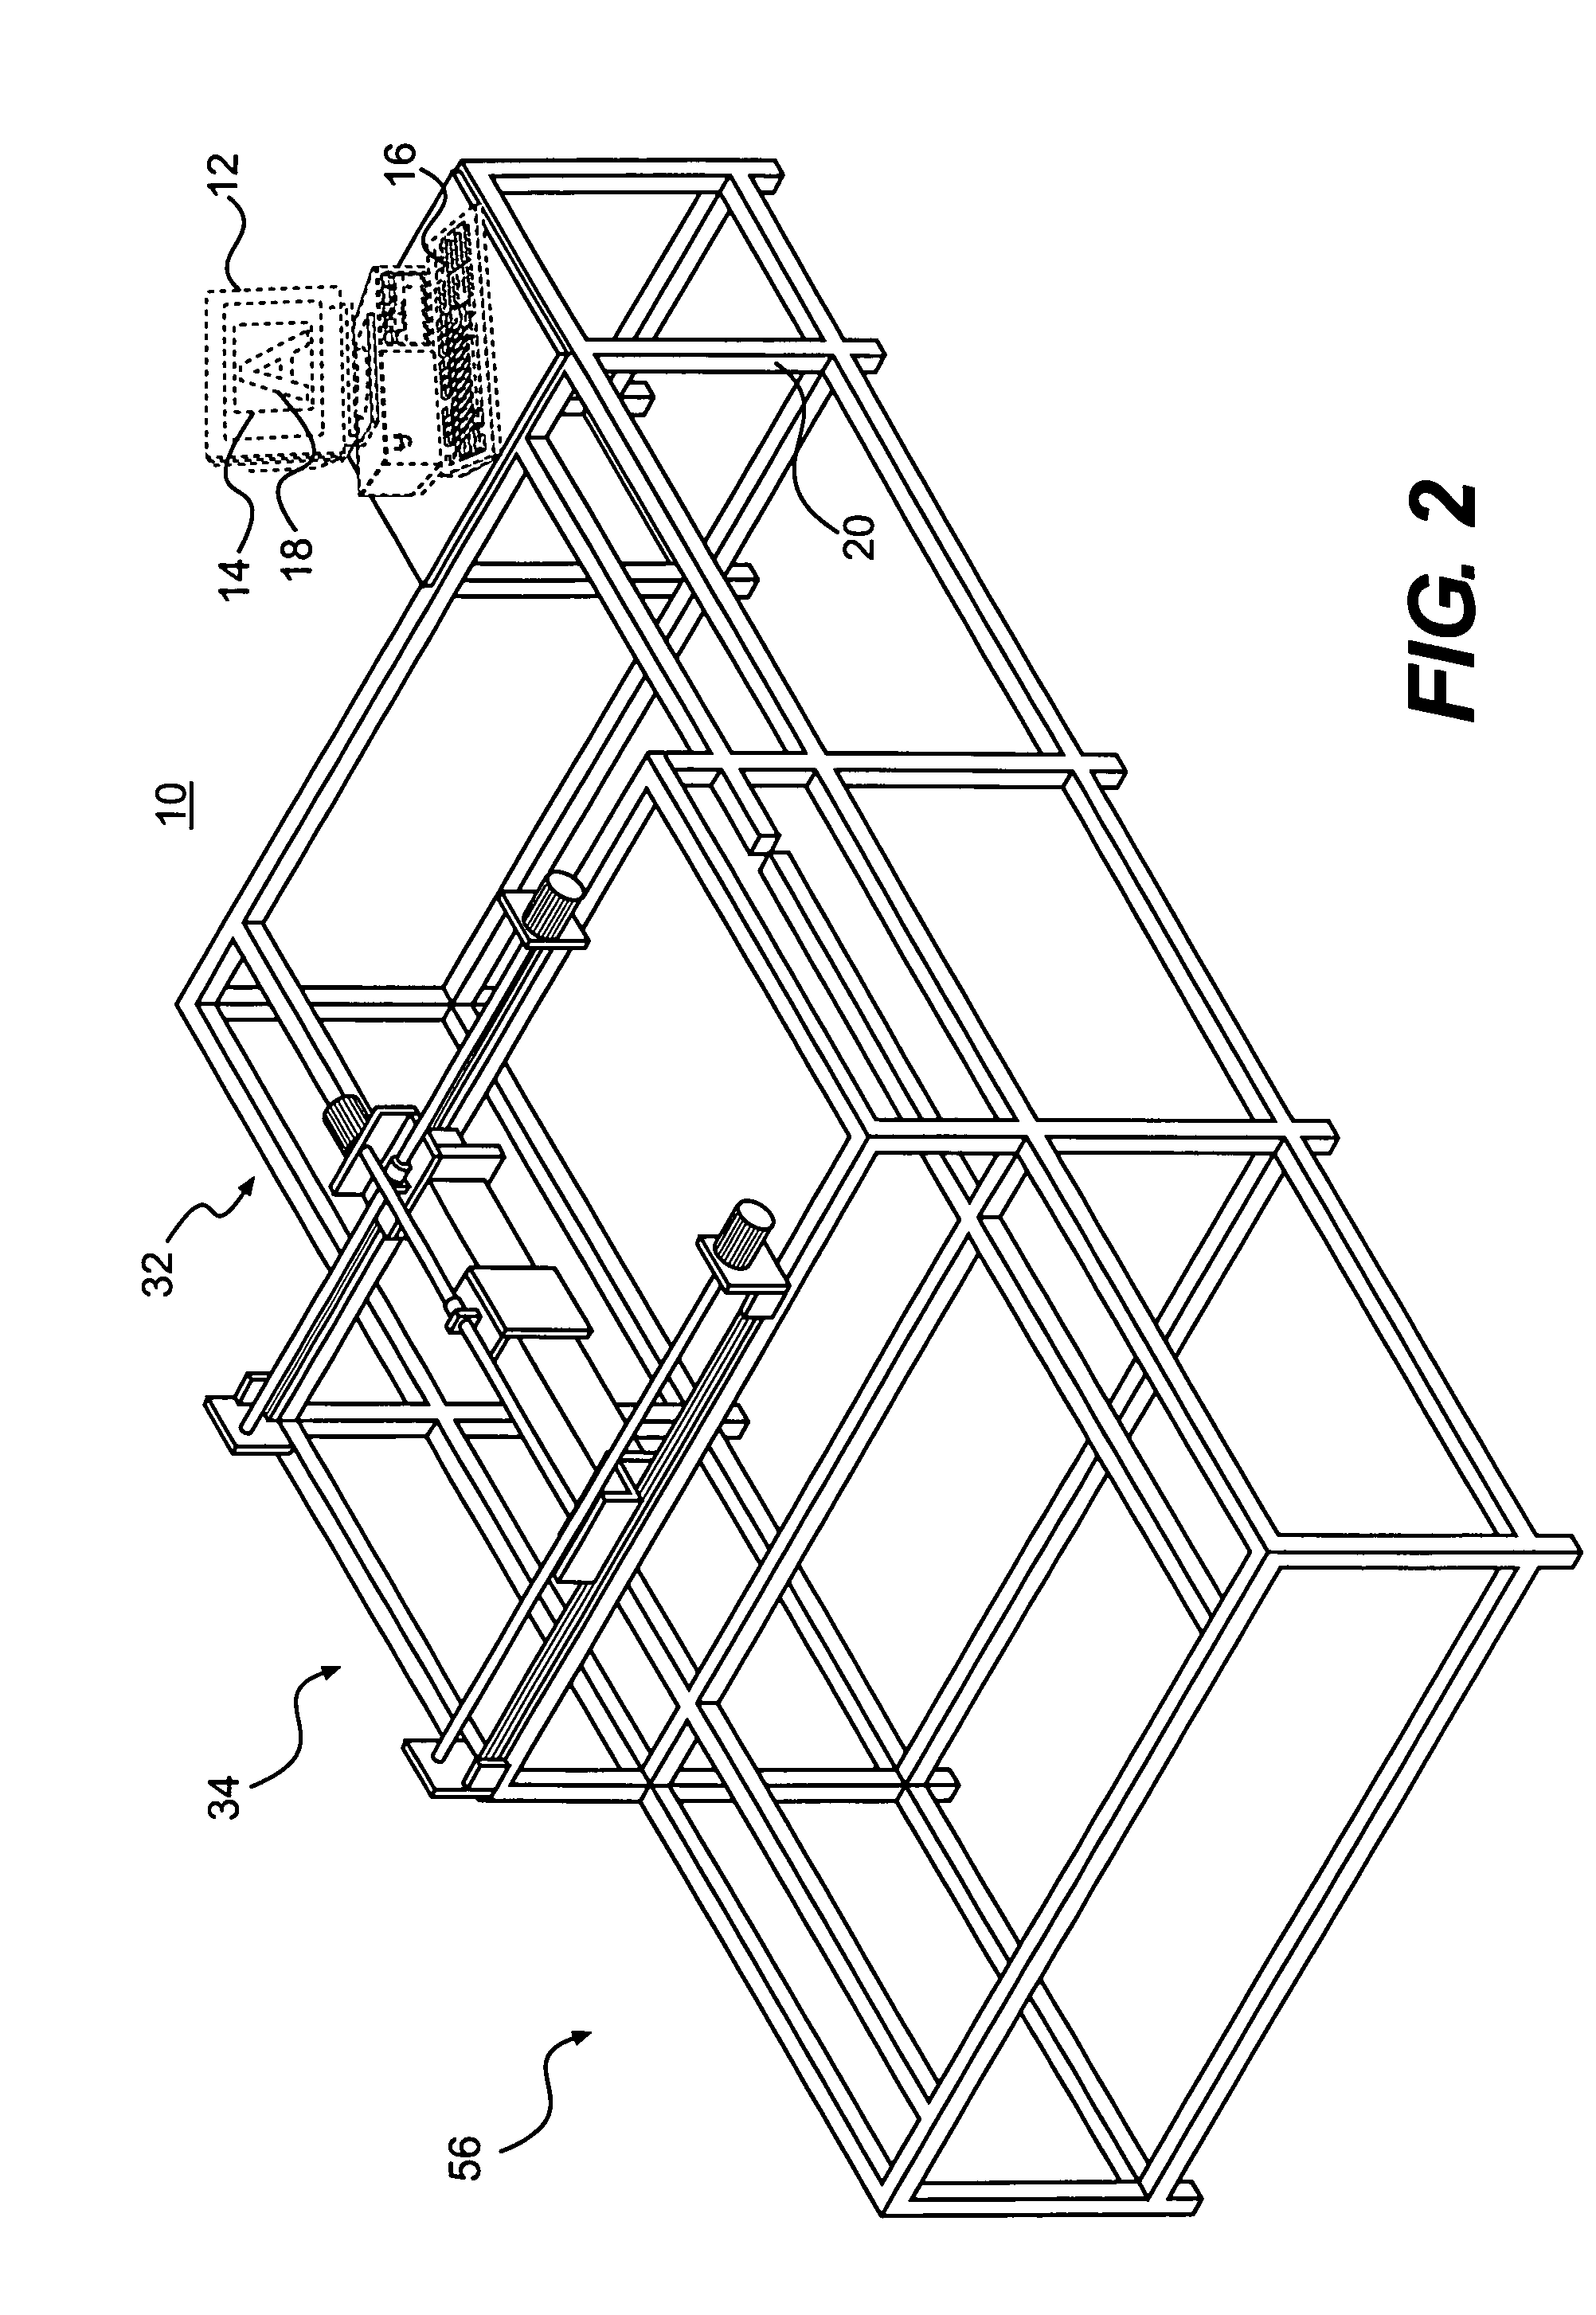 Molded object-forming apparatus and method